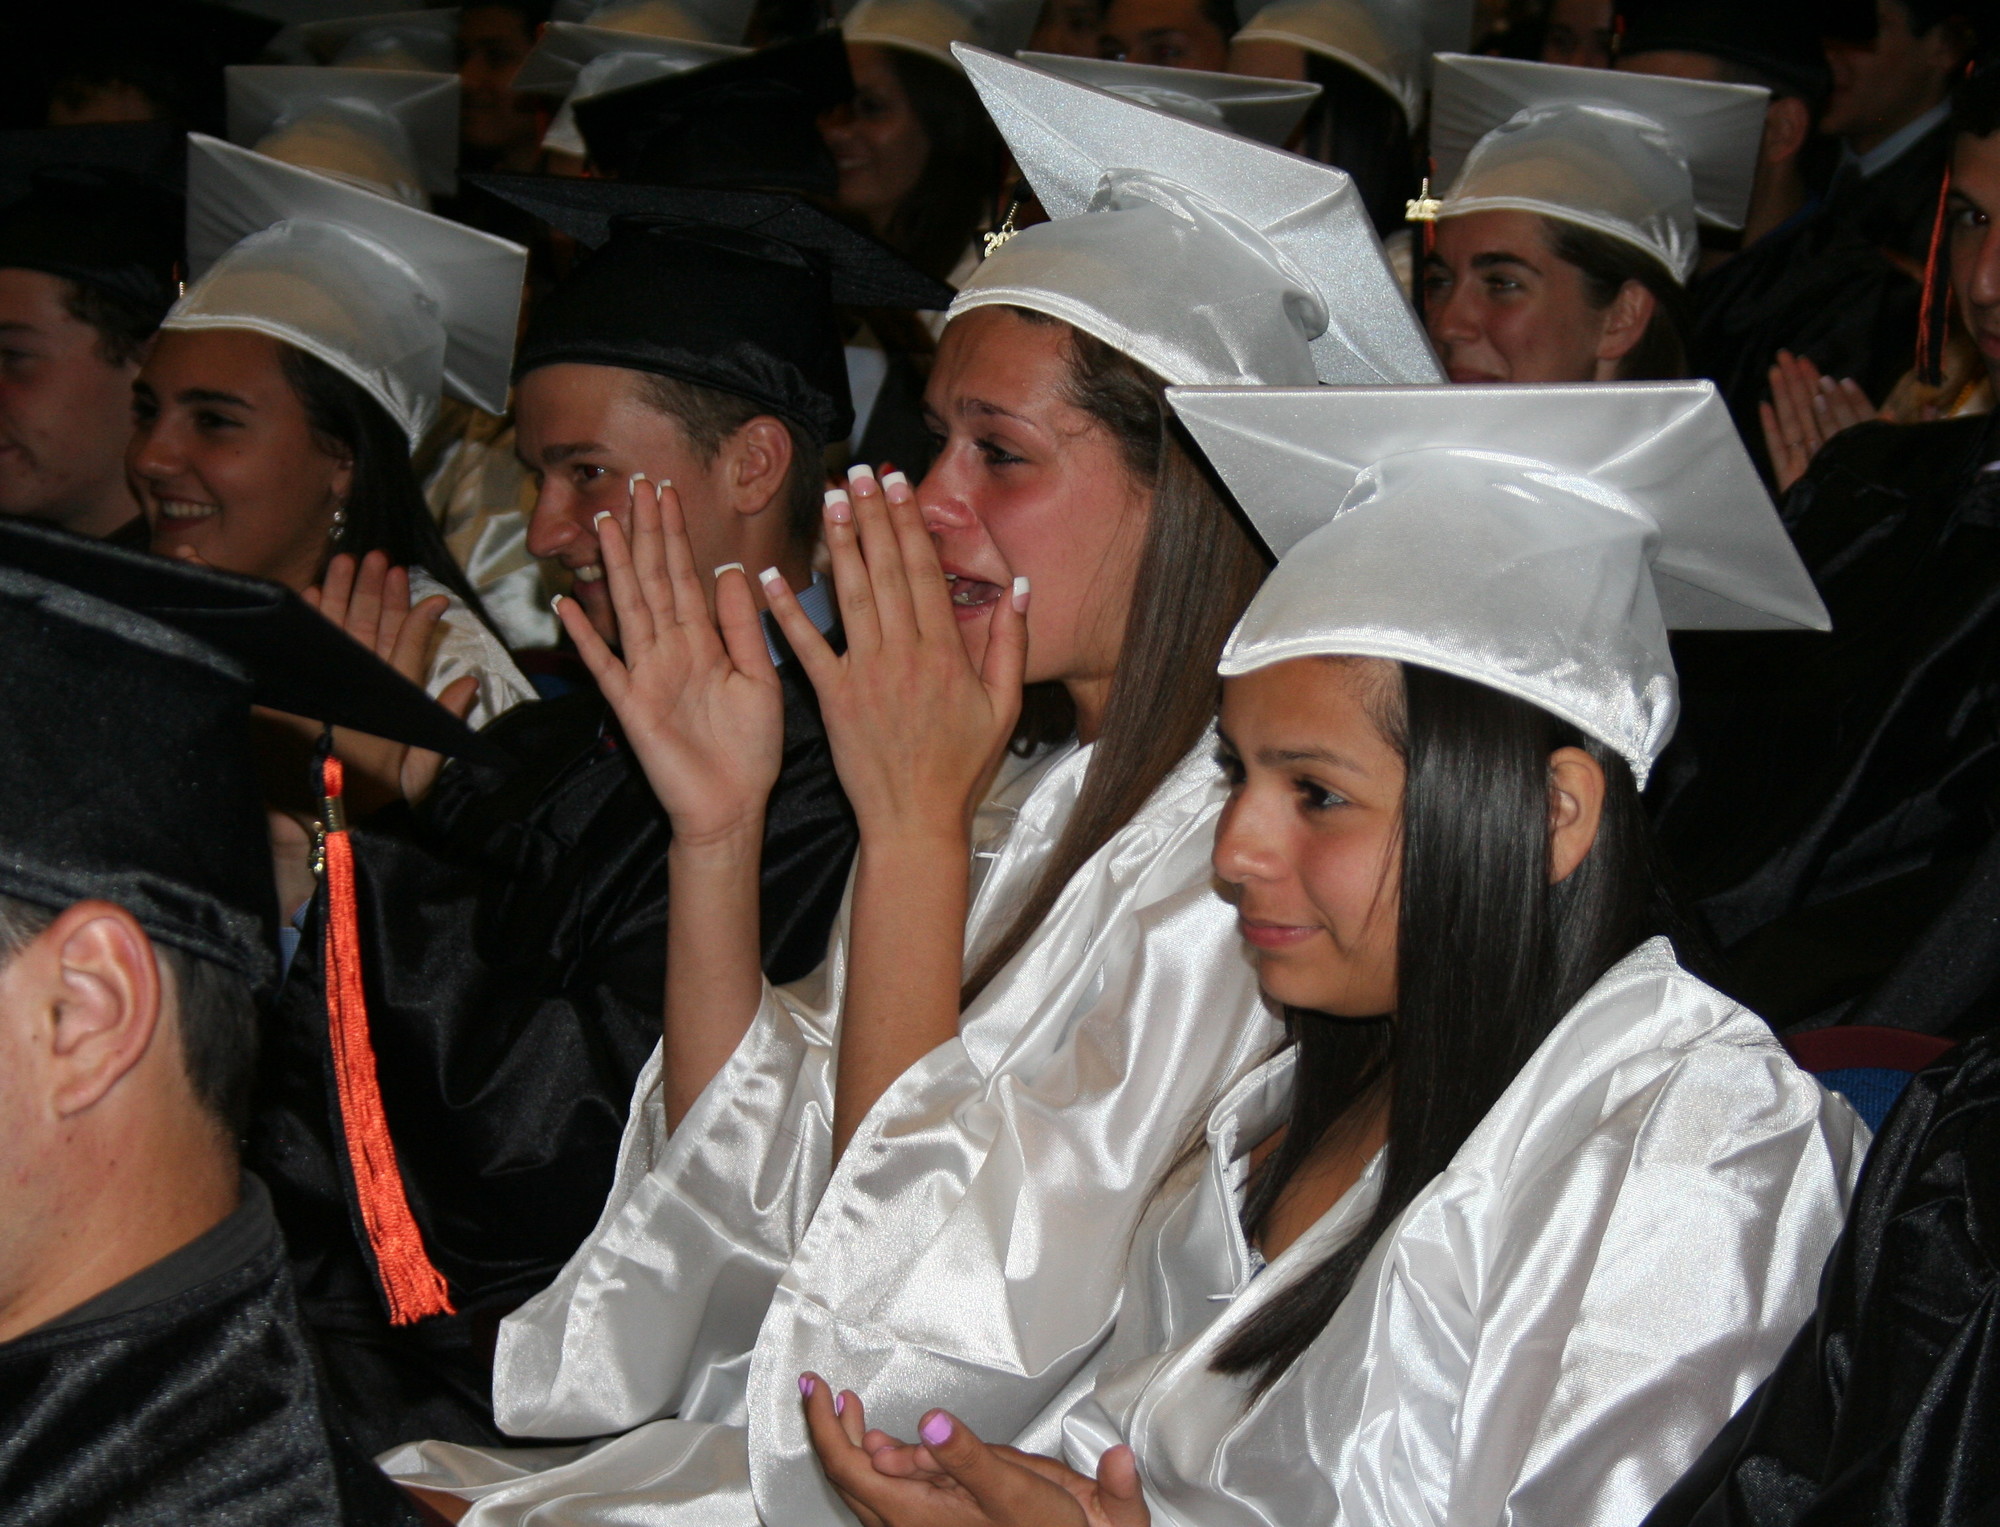 Seniors reacted with emotion during the speeches.